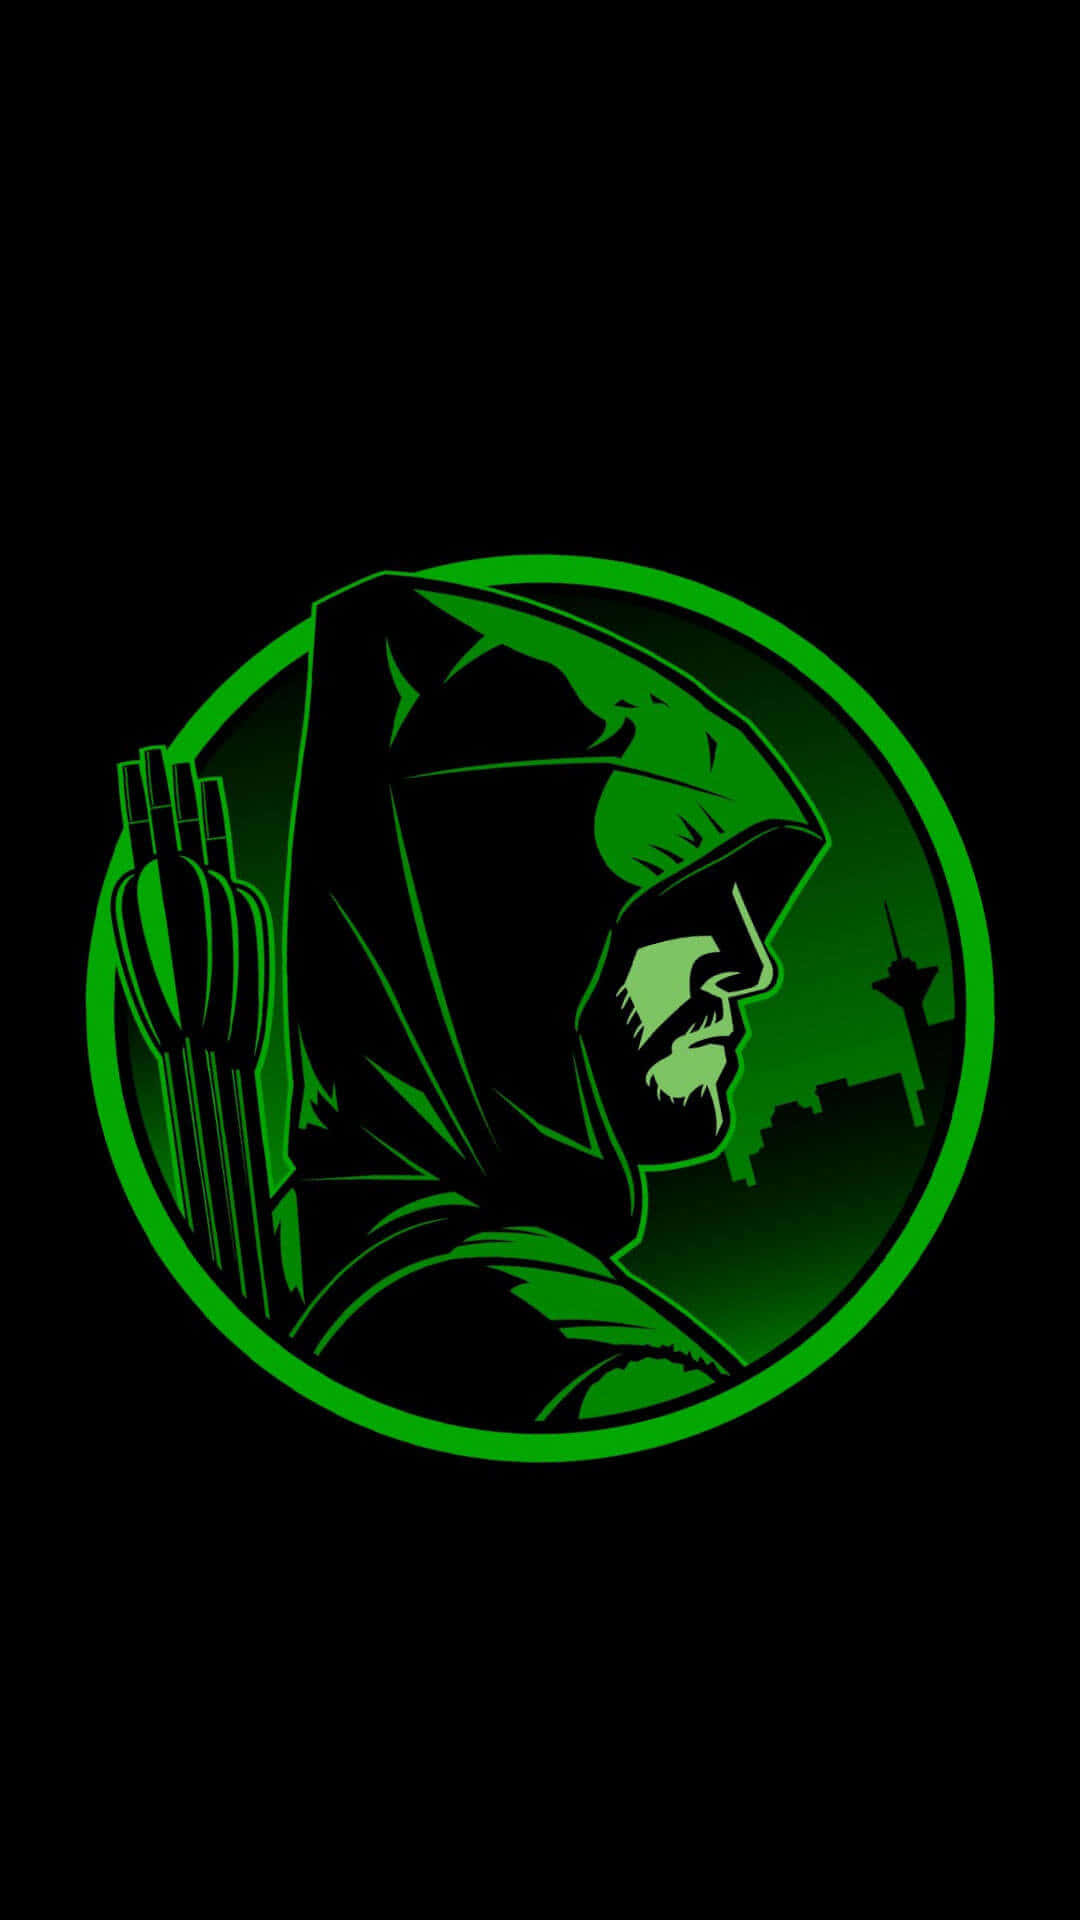 Get Steppin' With The Latest Green Arrow Iphone Wallpaper